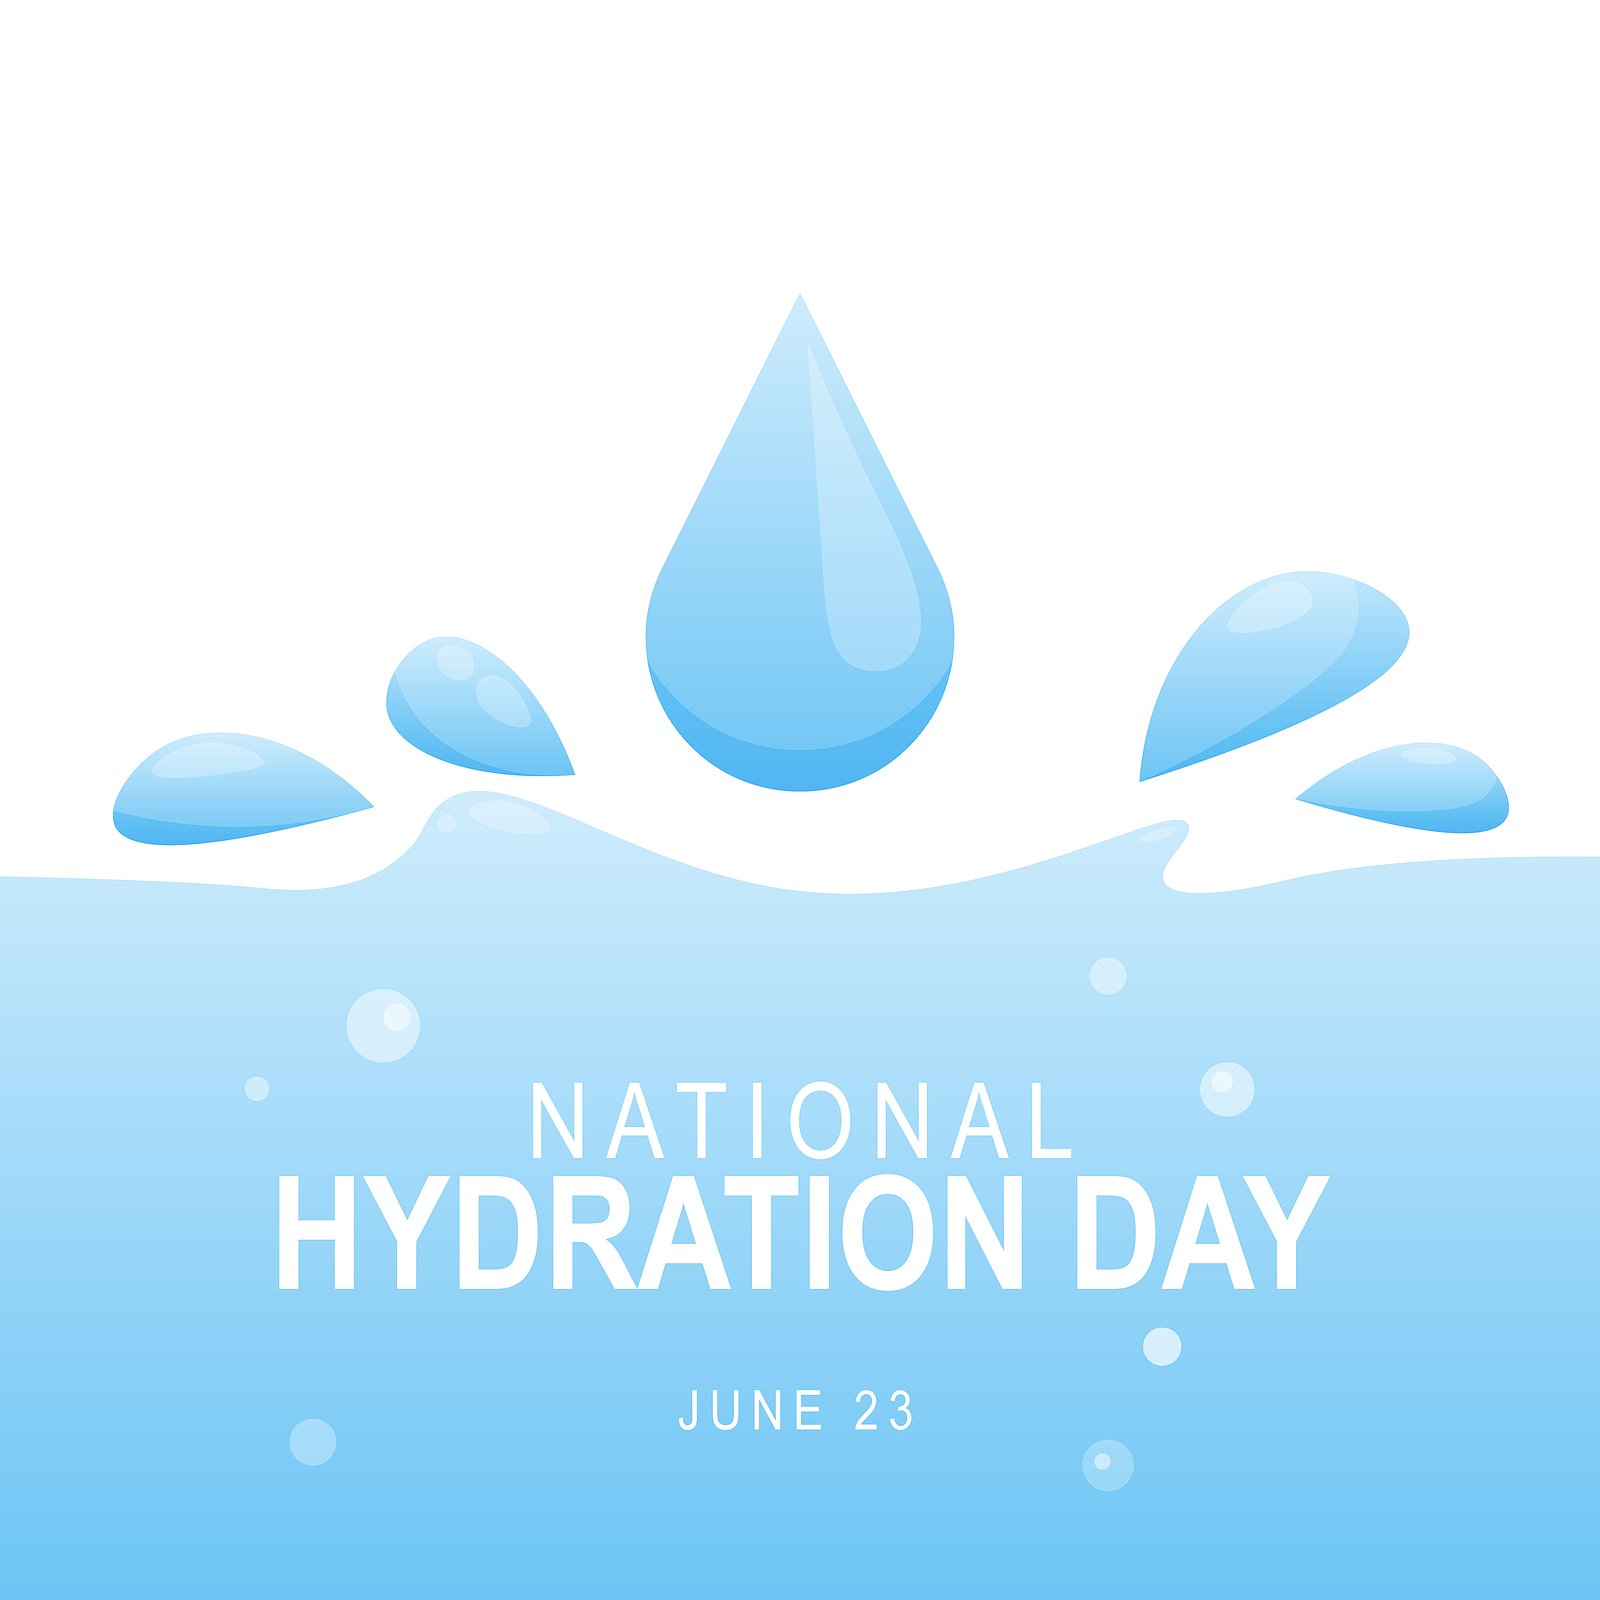 National Hydration Day 